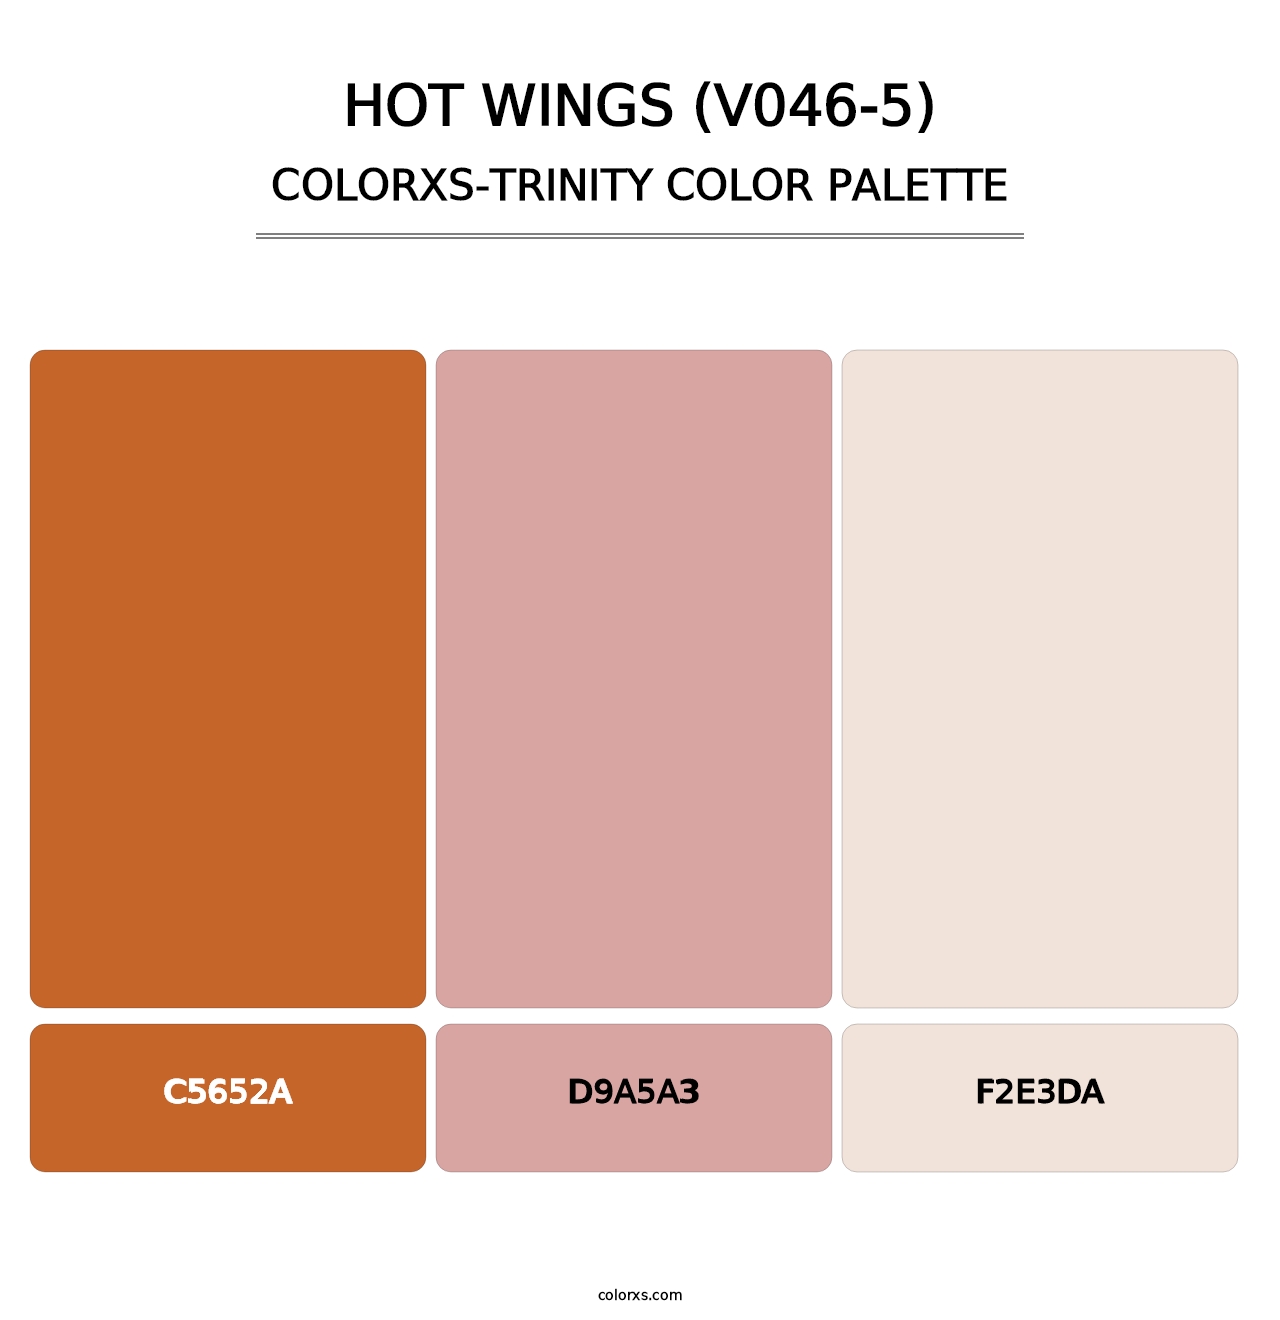 Hot Wings (V046-5) - Colorxs Trinity Palette